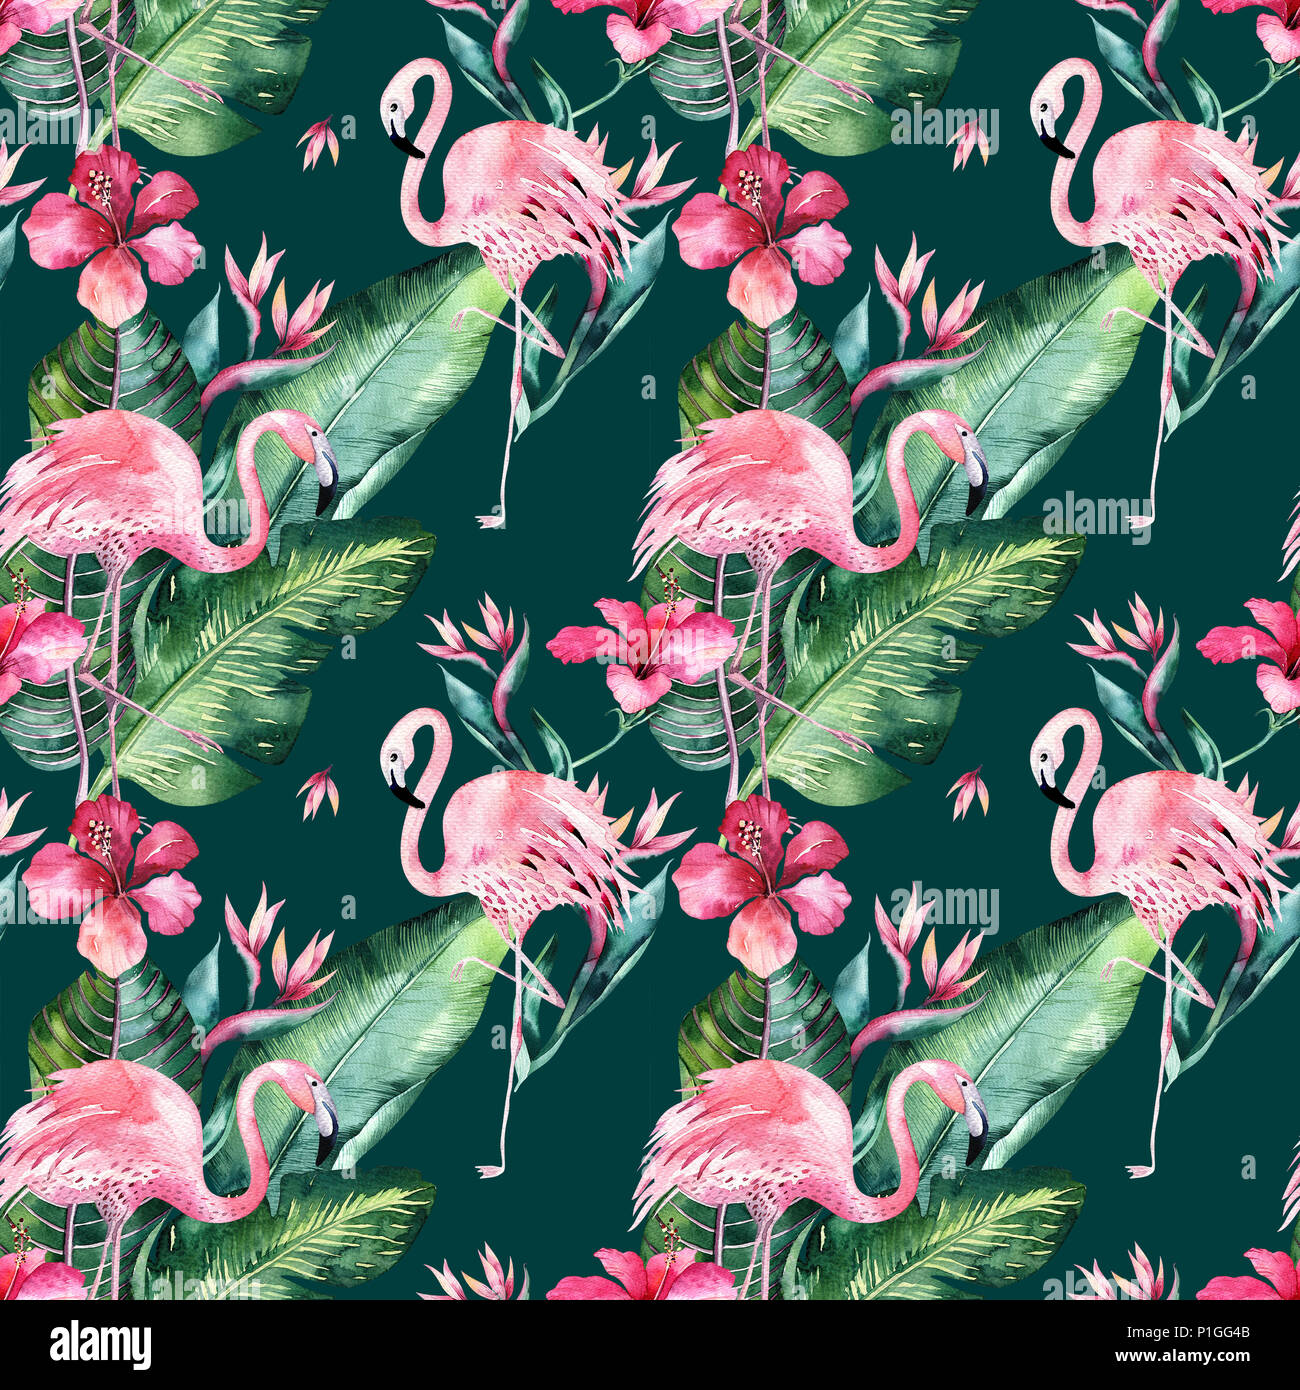 Tropical Seamless Floral Summer Pattern Background With Tropical Palm Leaves Pink Flamingo Bird Exotic Hibiscus Perfect For Wallpapers Textile Des Stock Photo Alamy